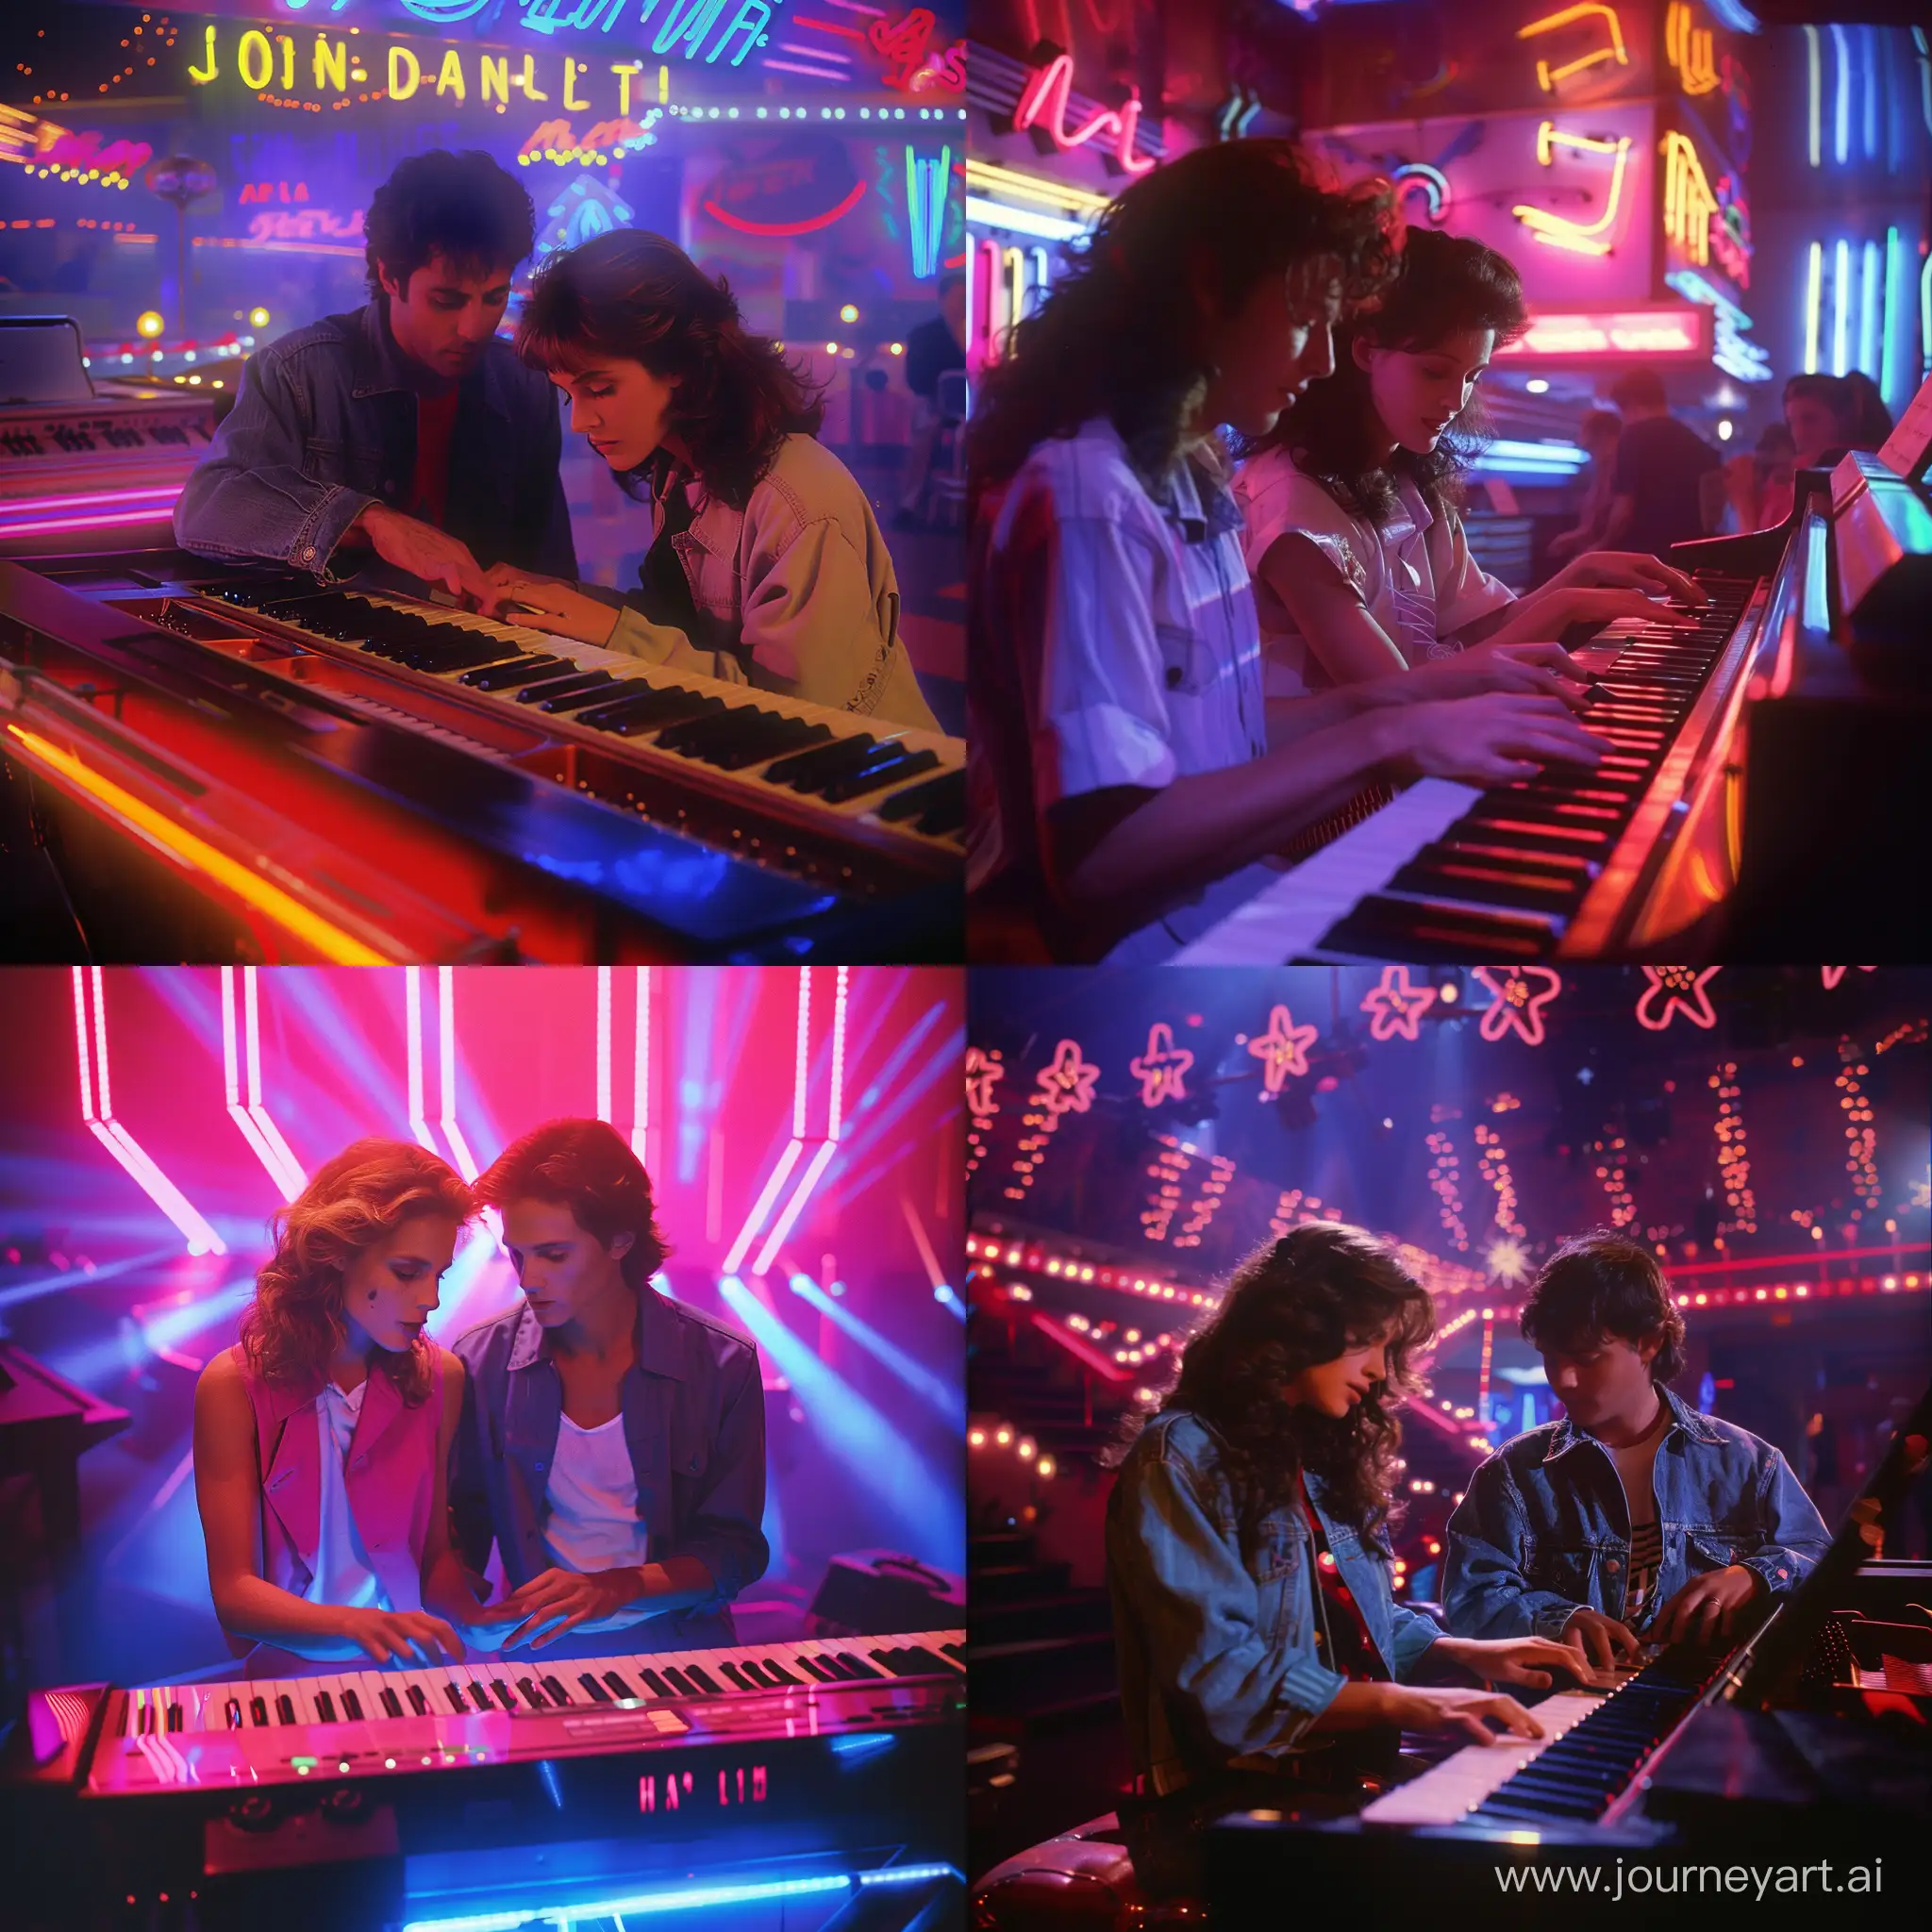 Young-Couple-Playing-Piano-Amid-Neon-Lights-Cinematic-Scene-Inspired-by-John-Carpenters-1980s-Style